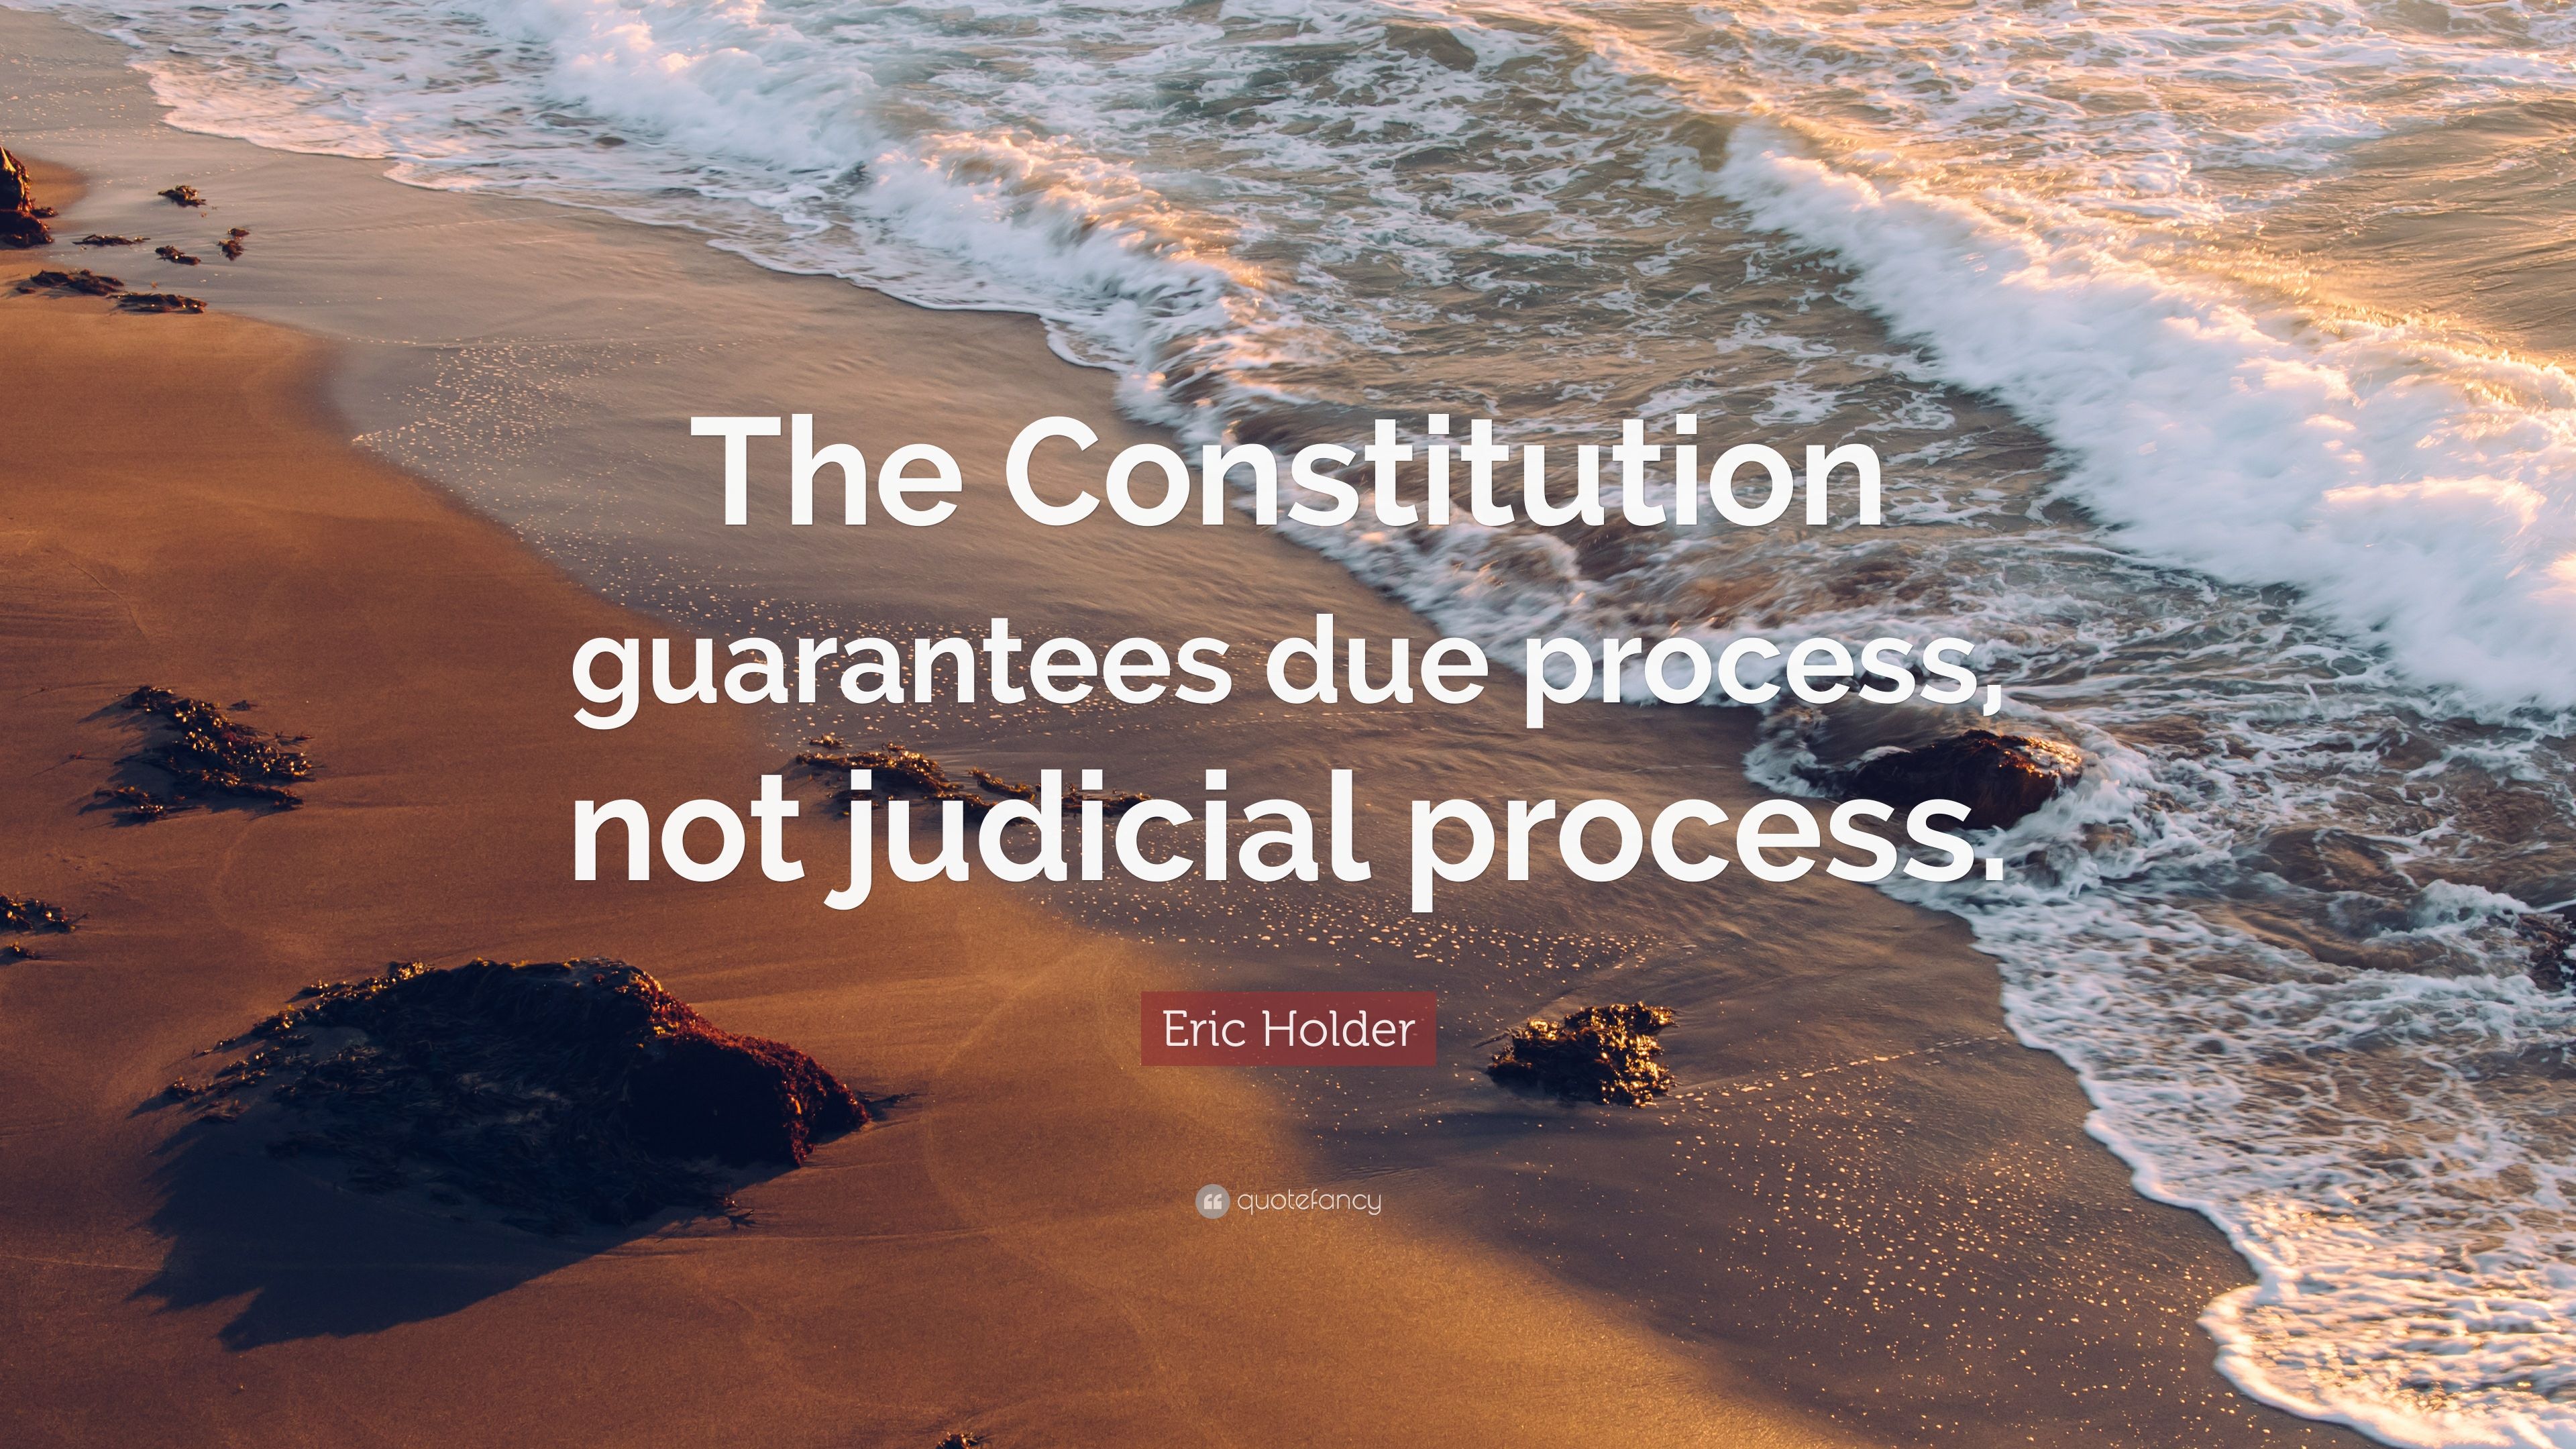 Due Process Wallpapers